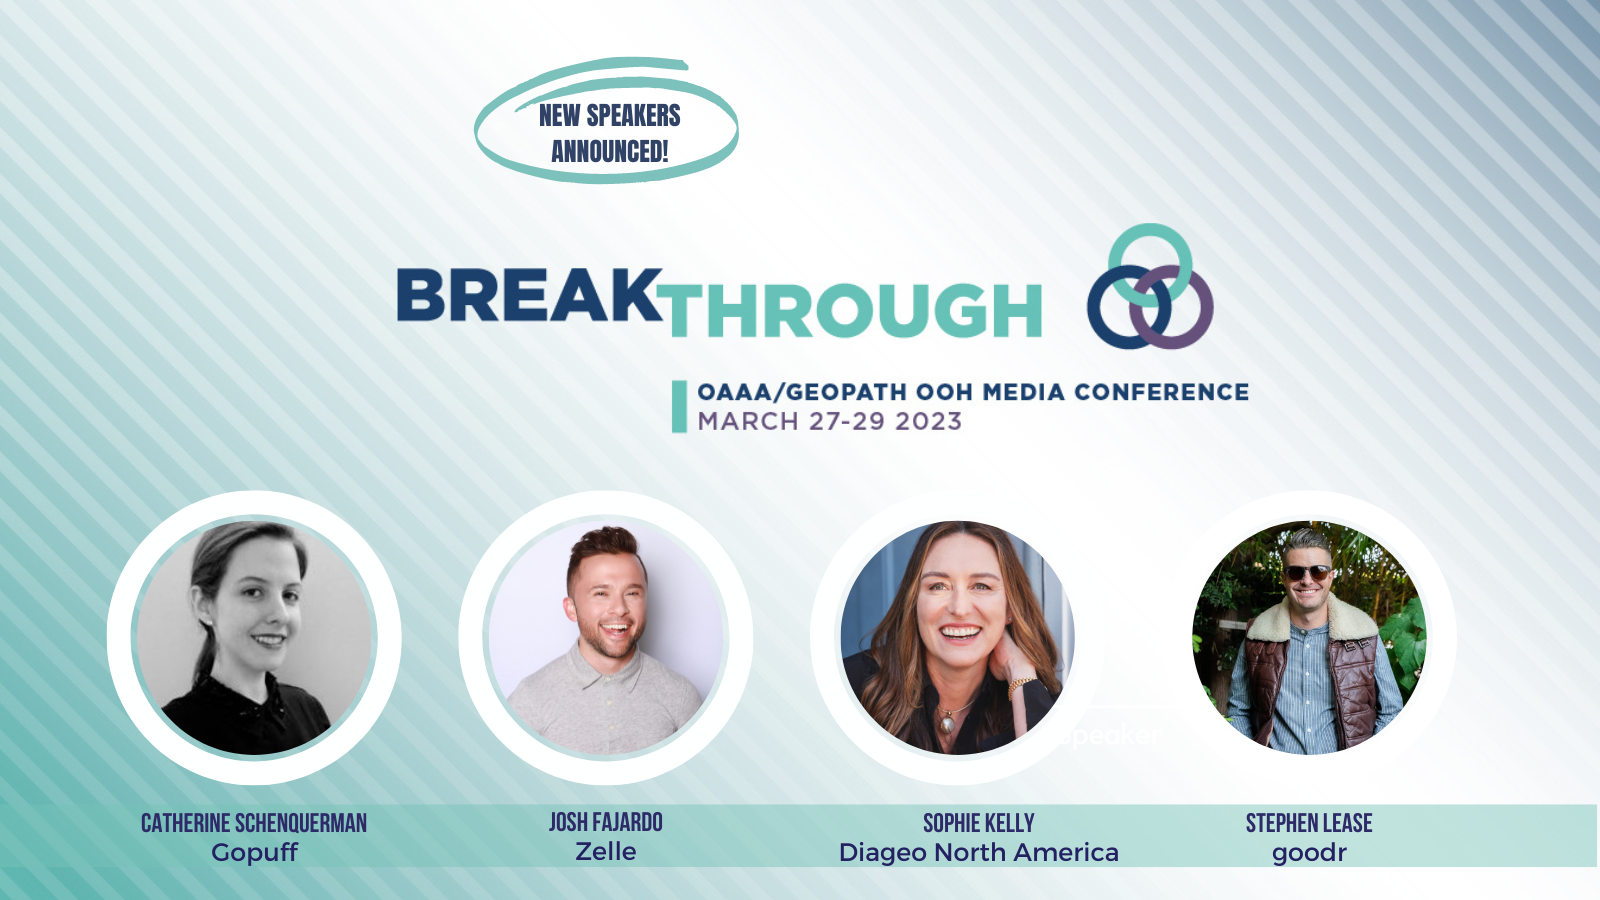 OAAA Unveils First Round of Speakers for the 2023 OAAA/Geopath OOH Media Conference